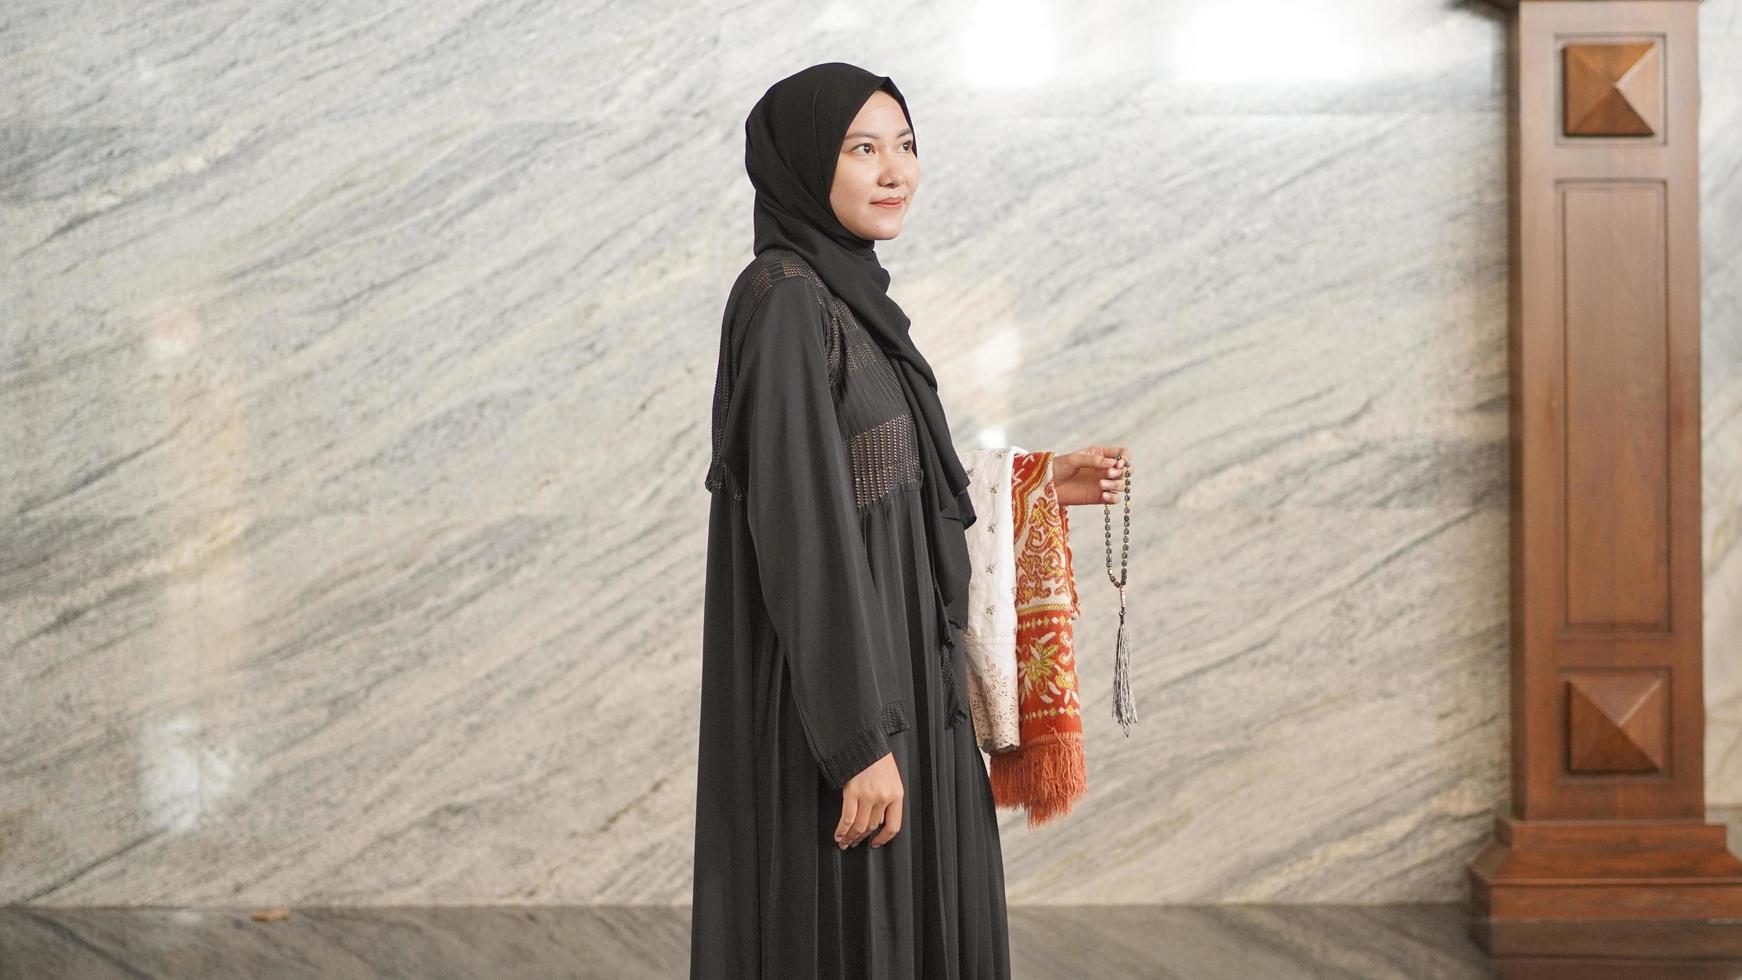 Muslim woman after worship at the mosque photo